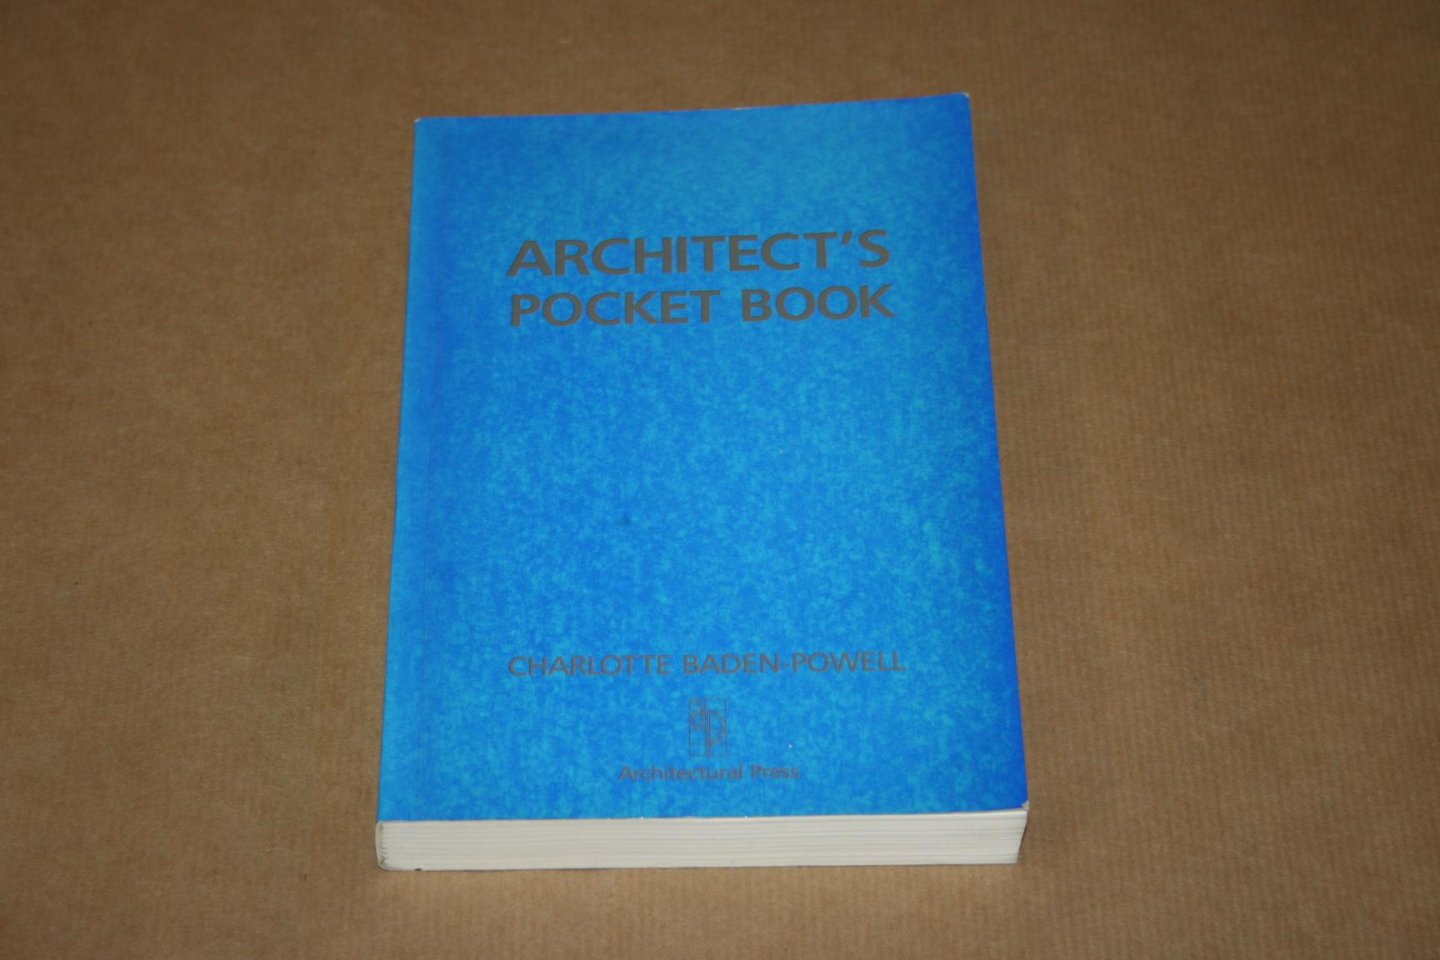 Charlotte Baden-Powell - The Architect's Pocket Book